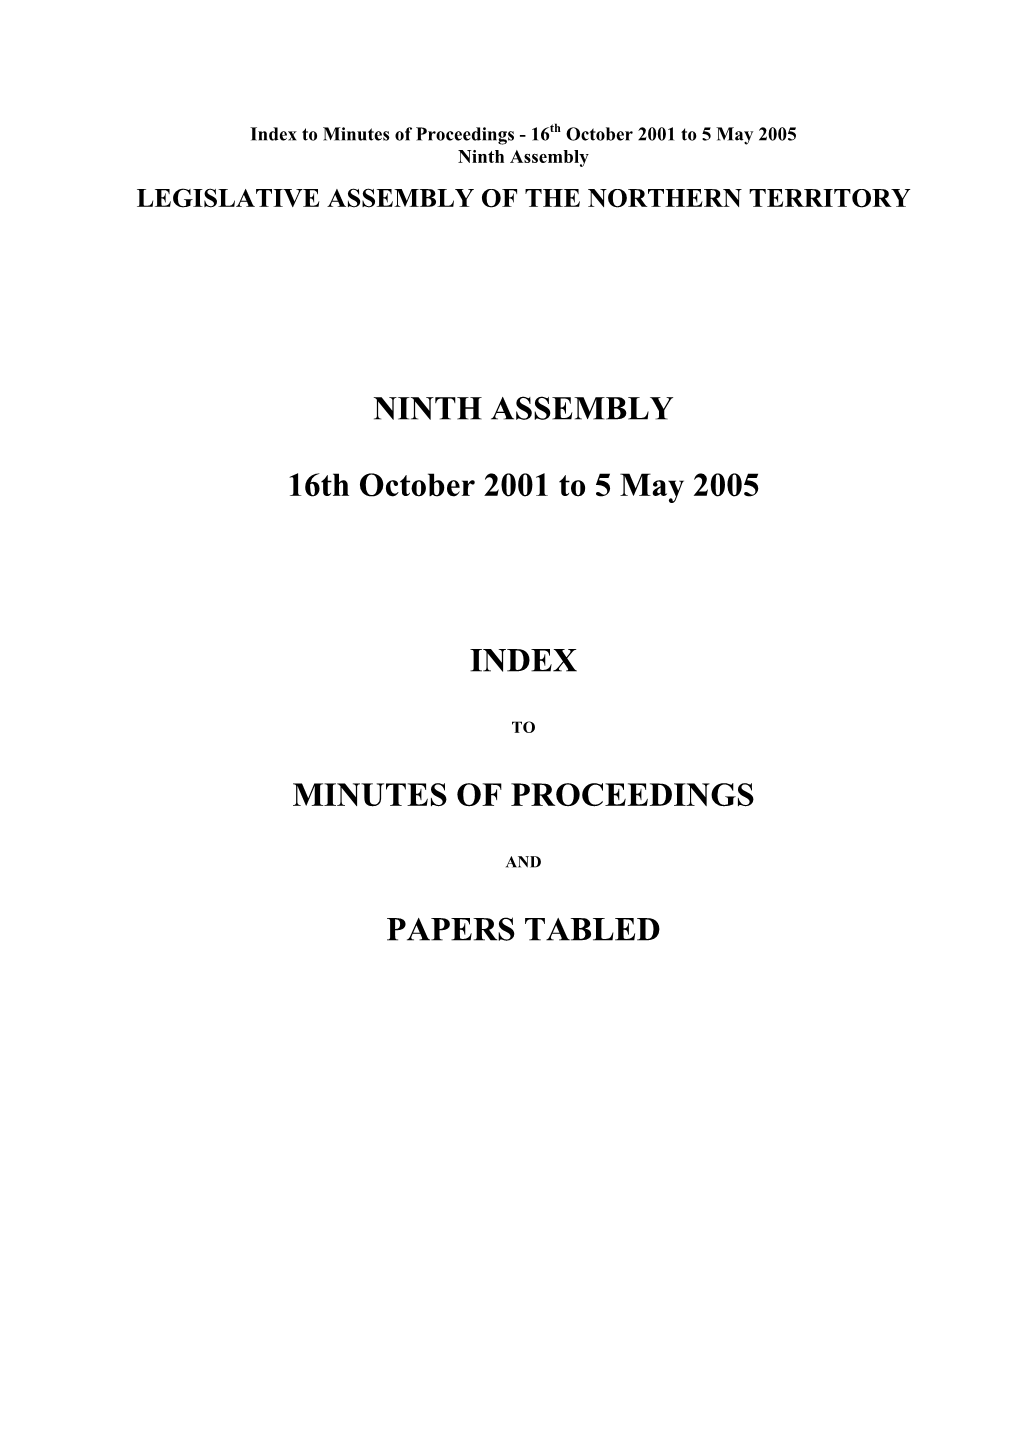 NINTH ASSEMBLY 16Th October 2001 to 5 May 2005 INDEX MINUTES